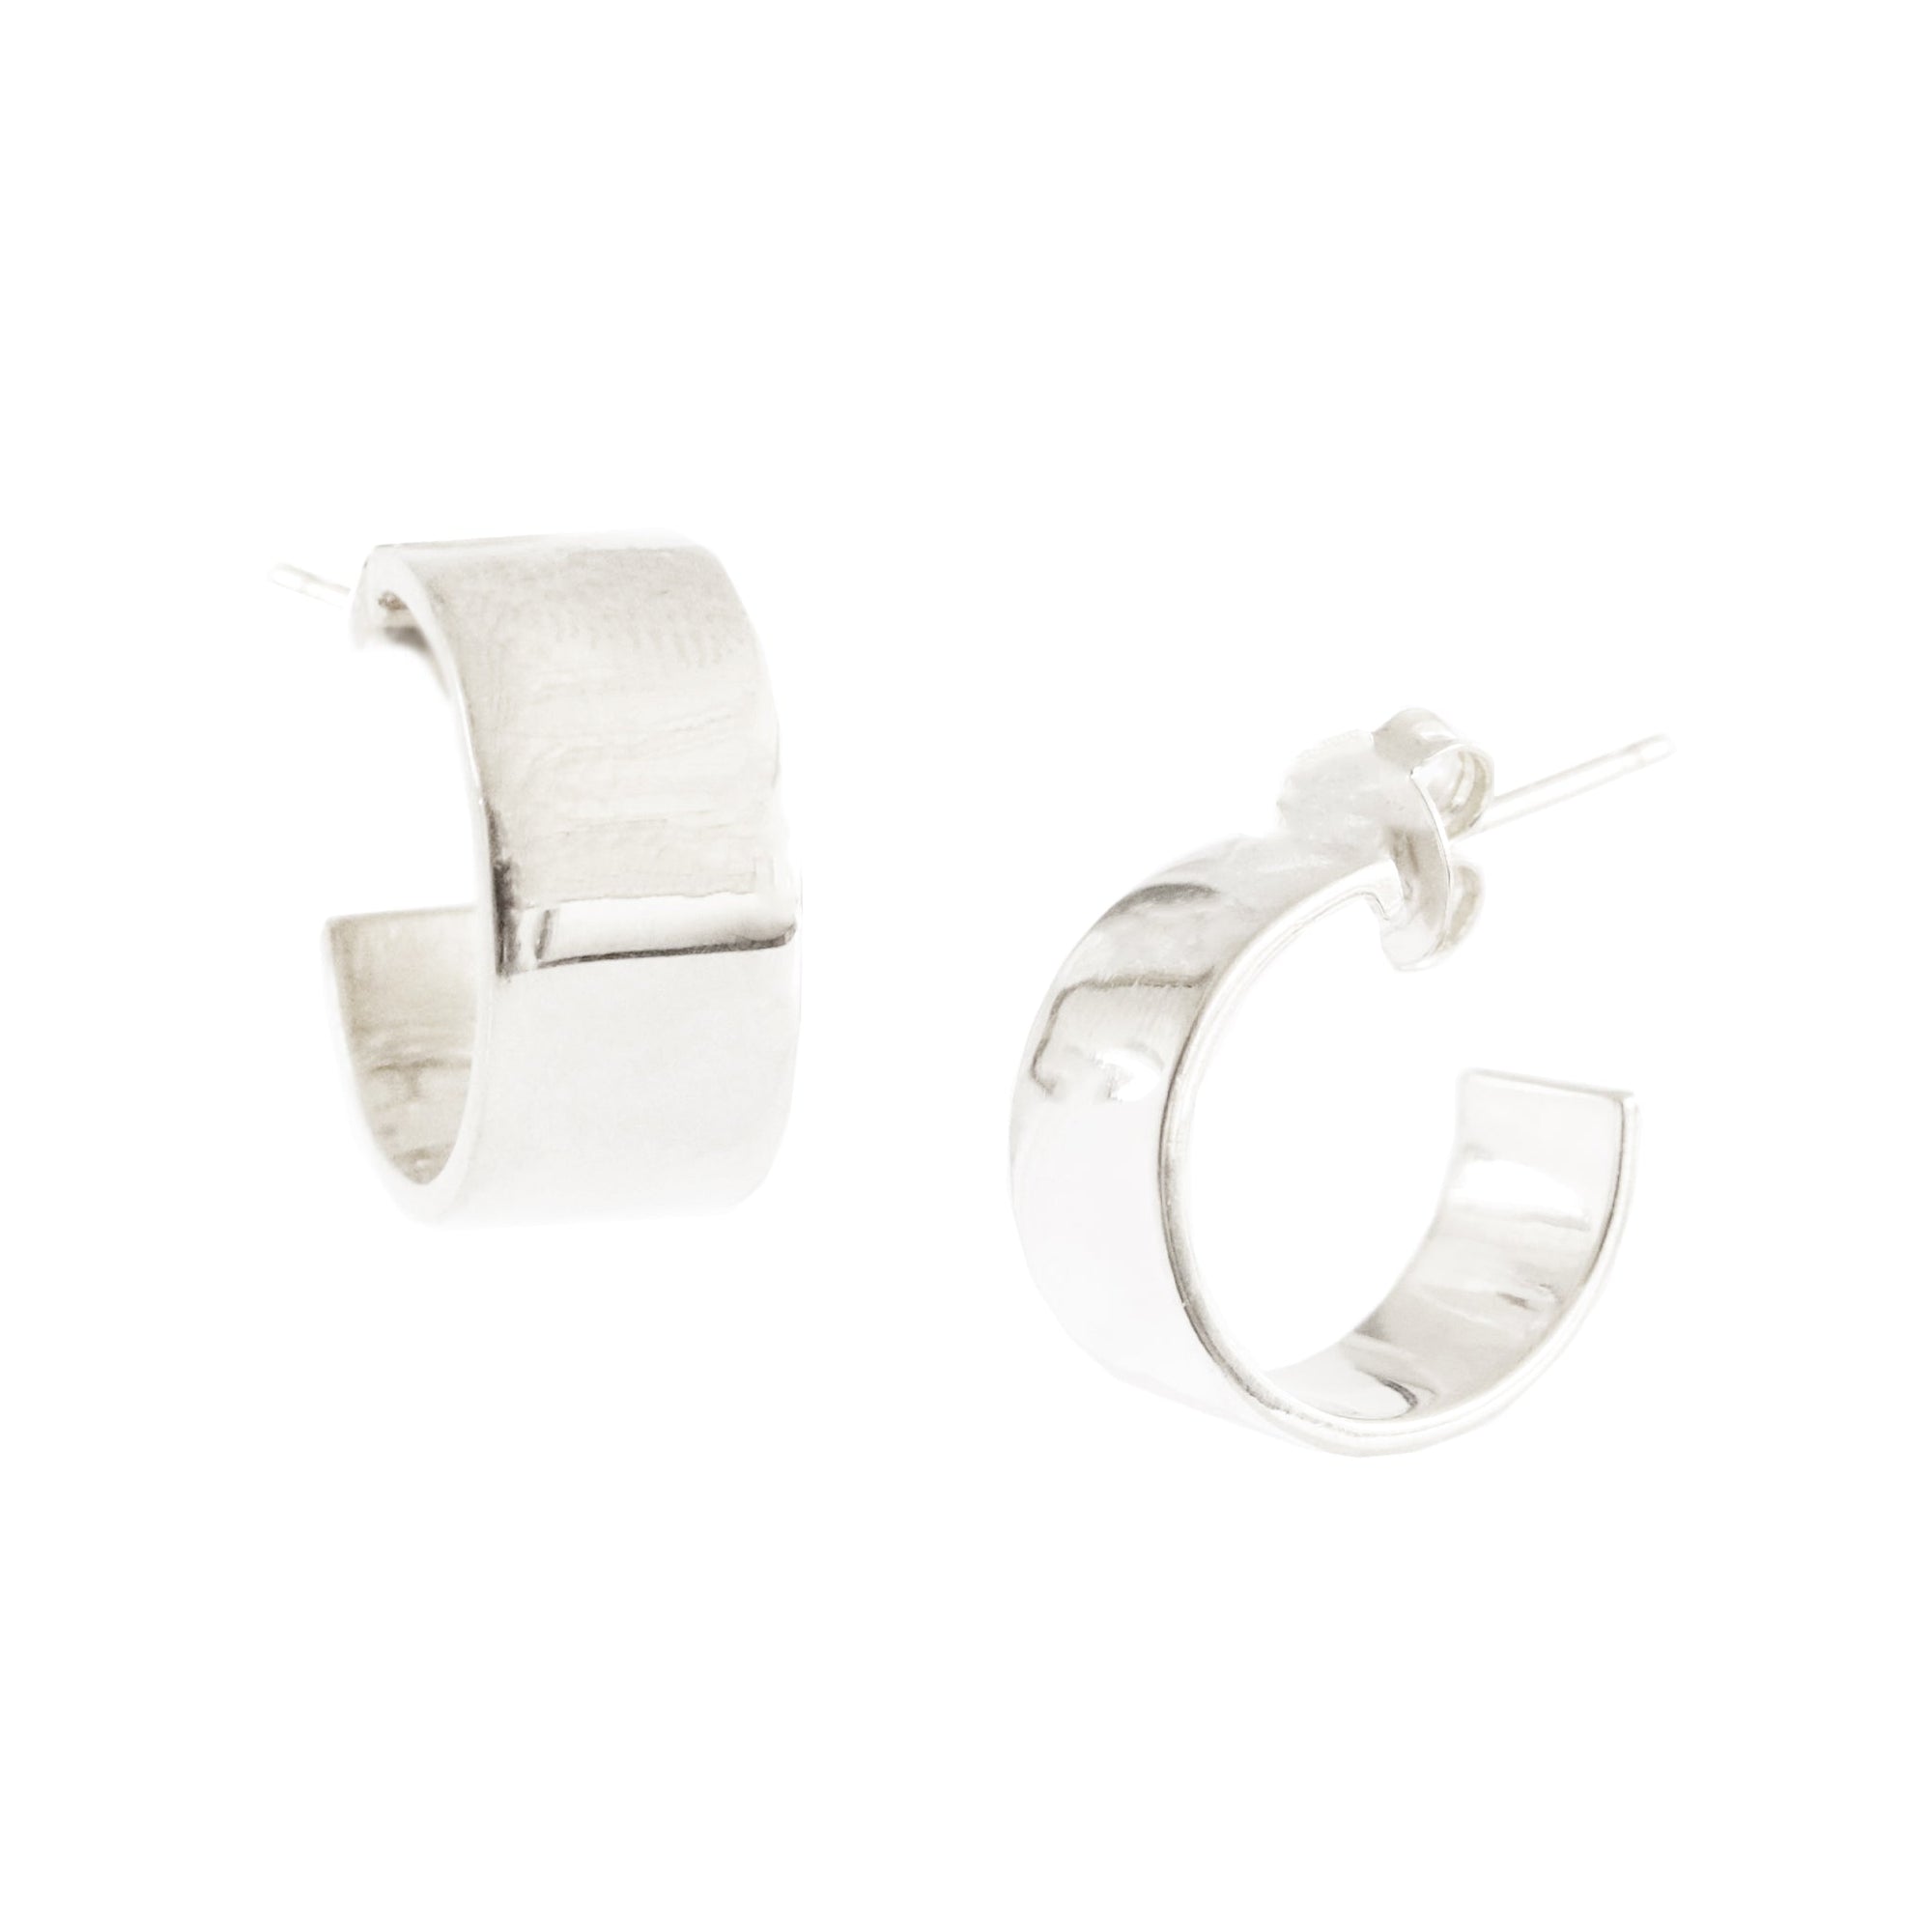 POISE CIGAR BAND HOOPS - SILVER - SO PRETTY CARA COTTER